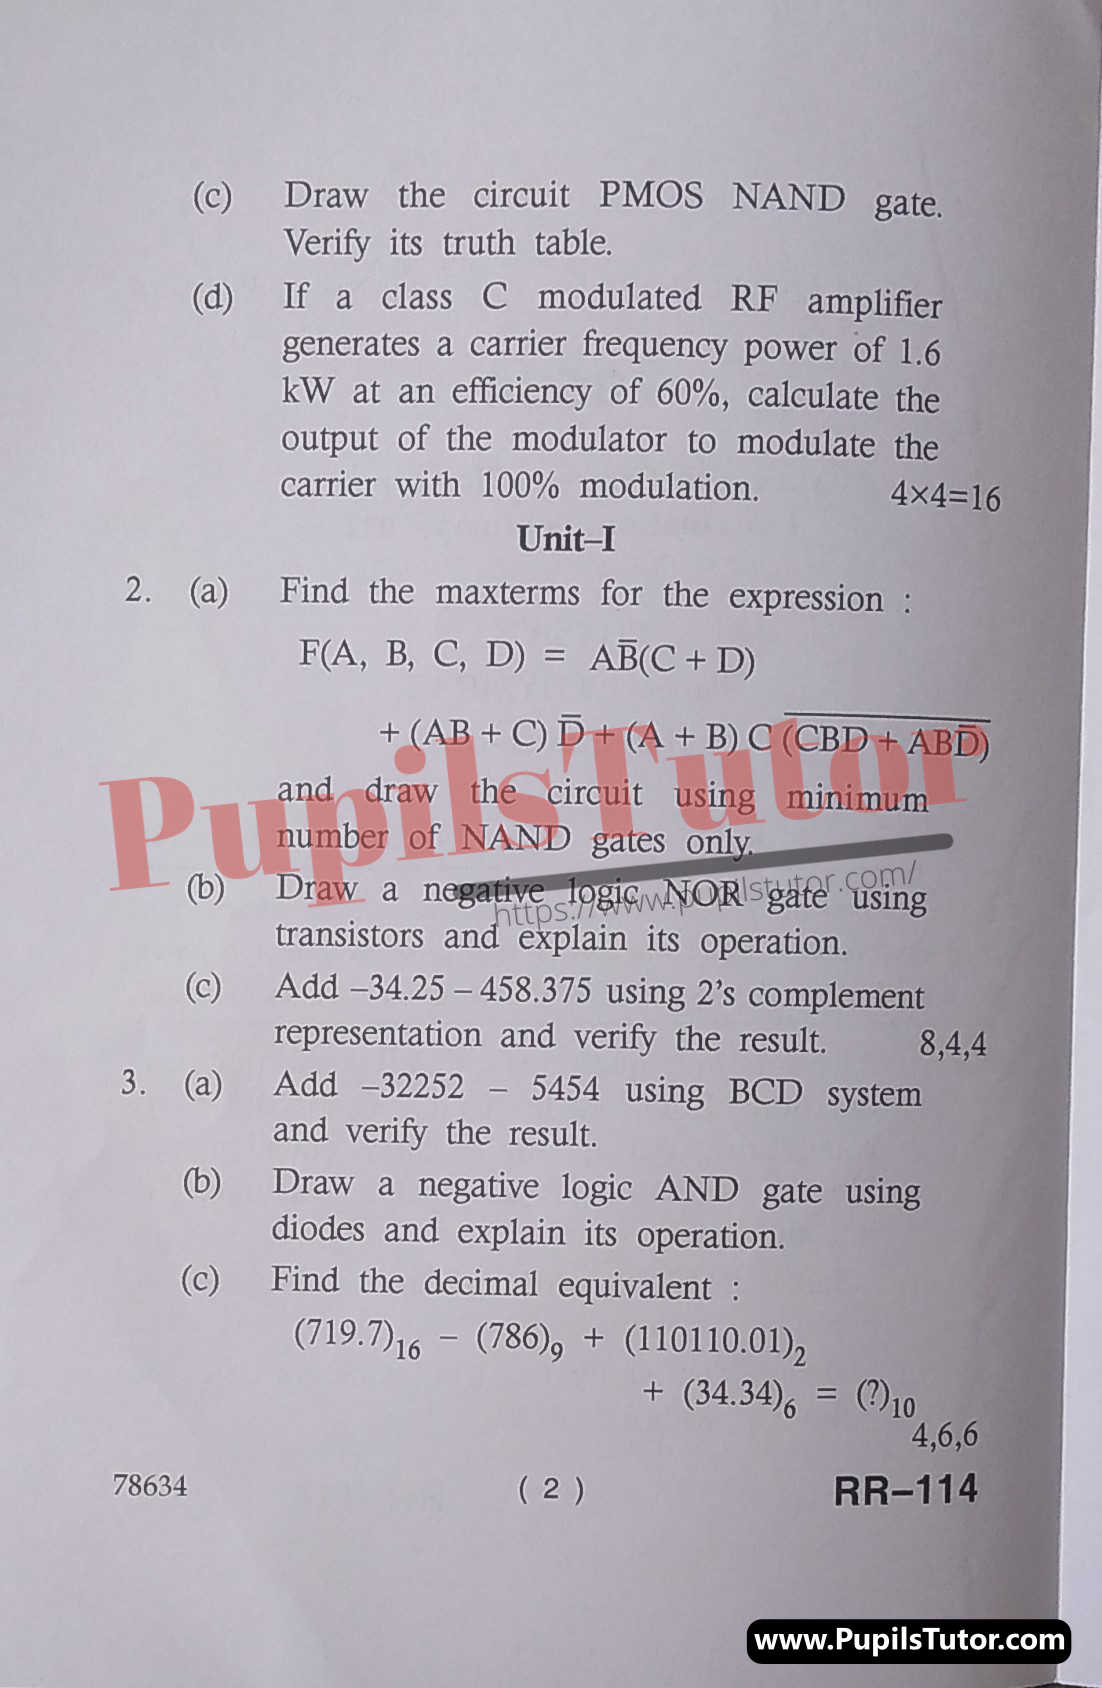 M.D. University M.Sc. [Physics] Electronics-II Fourth Semester Important Question Answer And Solution - www.pupilstutor.com (Paper Page Number 2)